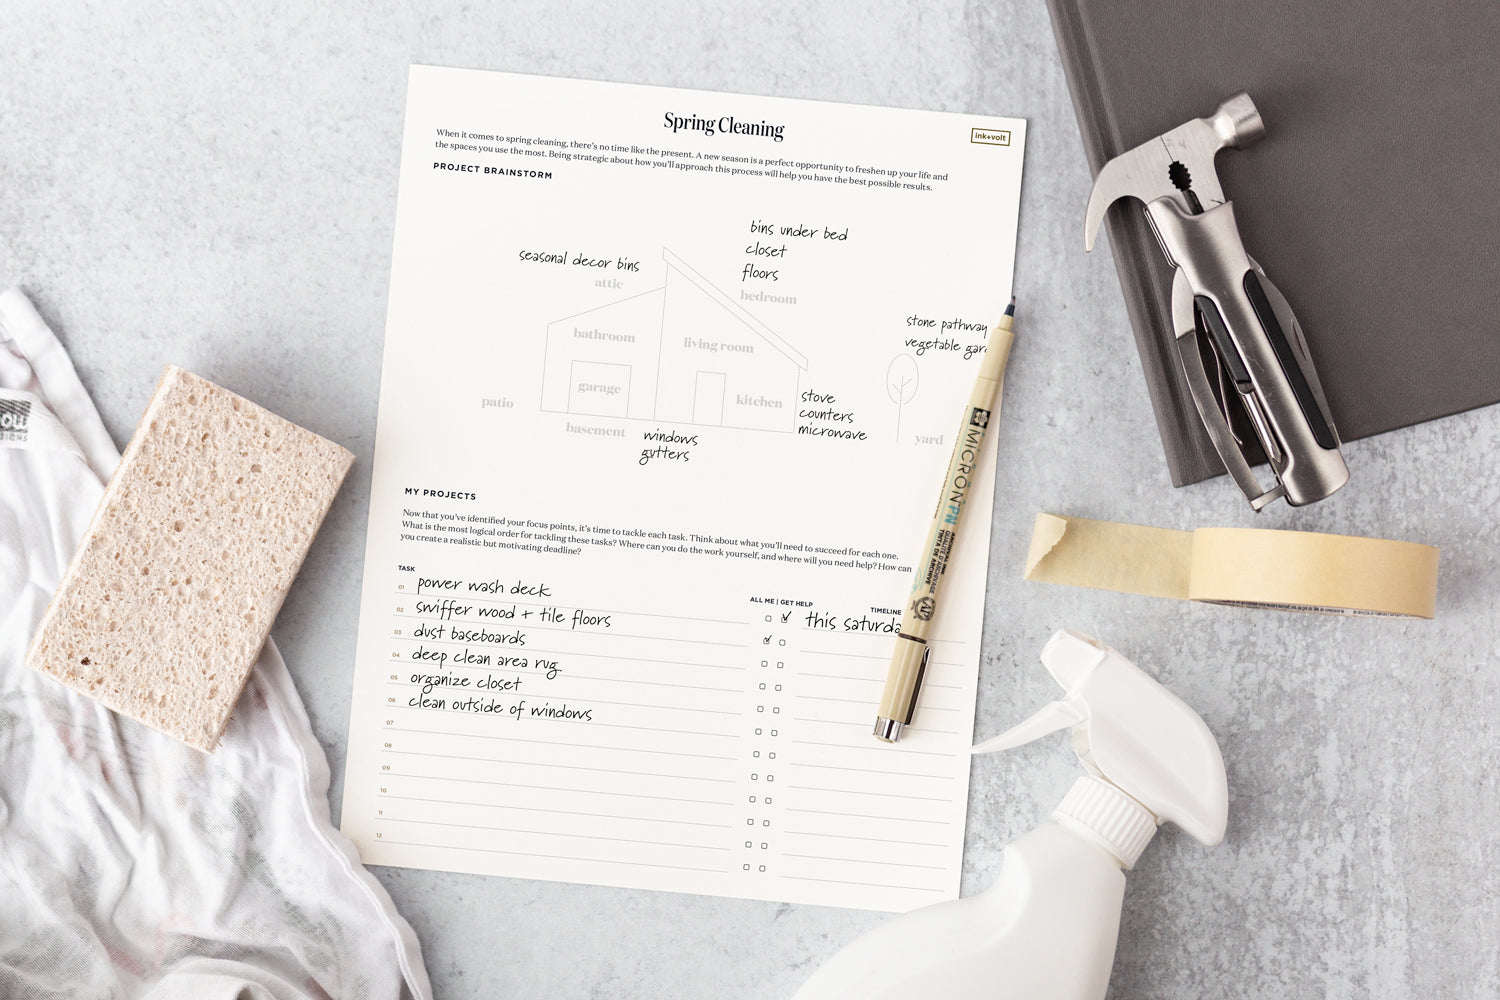 Free Worksheet: The Ultimate Guide to Tackling Spring Cleaning